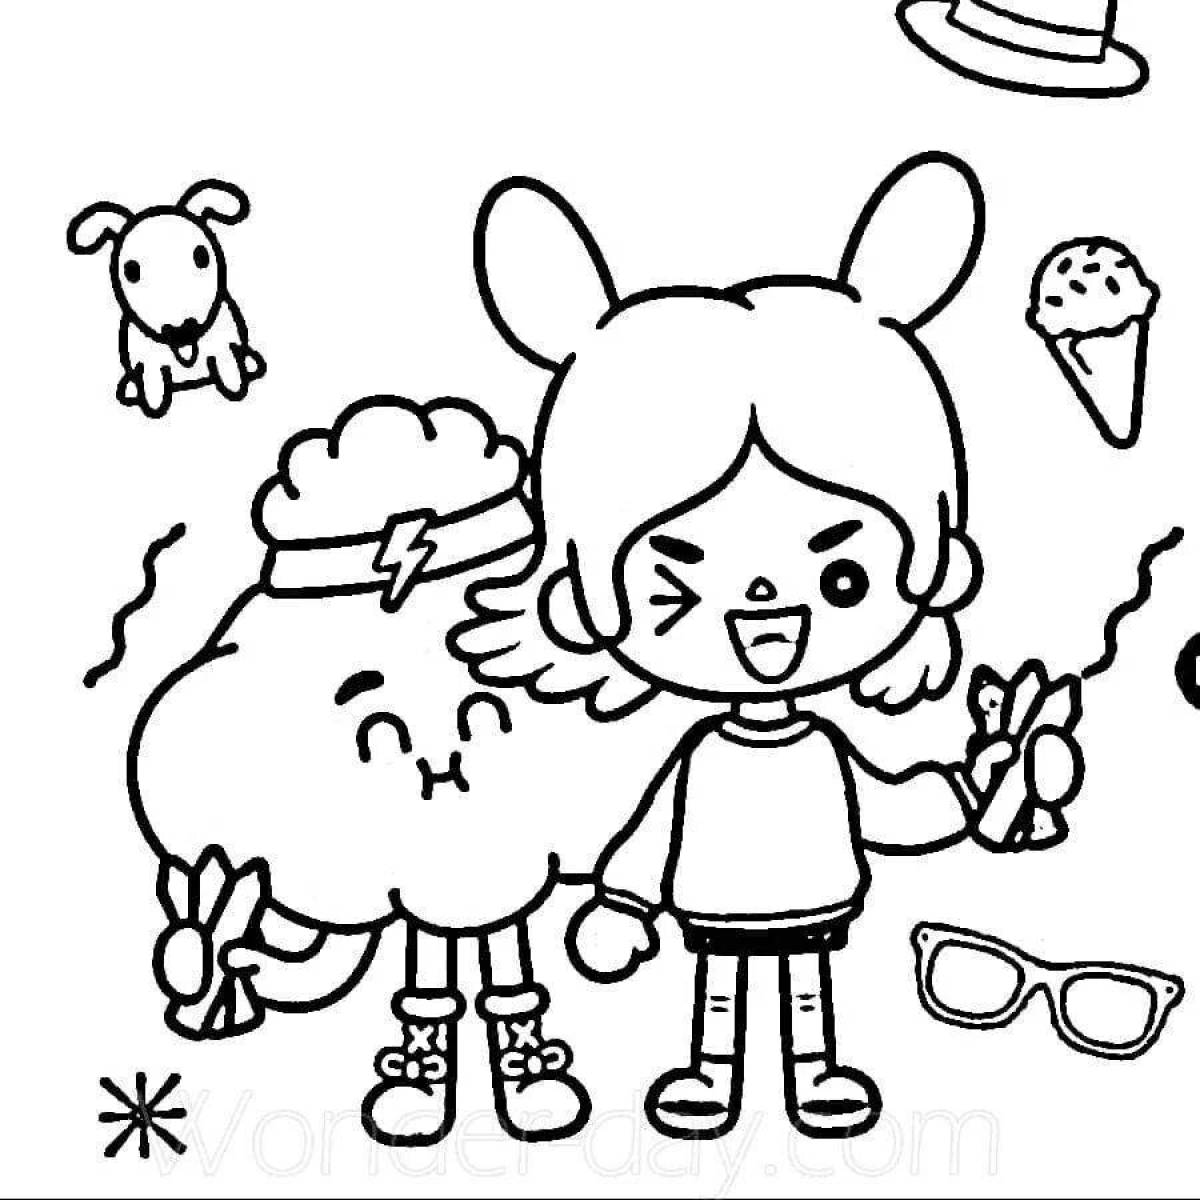 Tosa vosa live coloring page